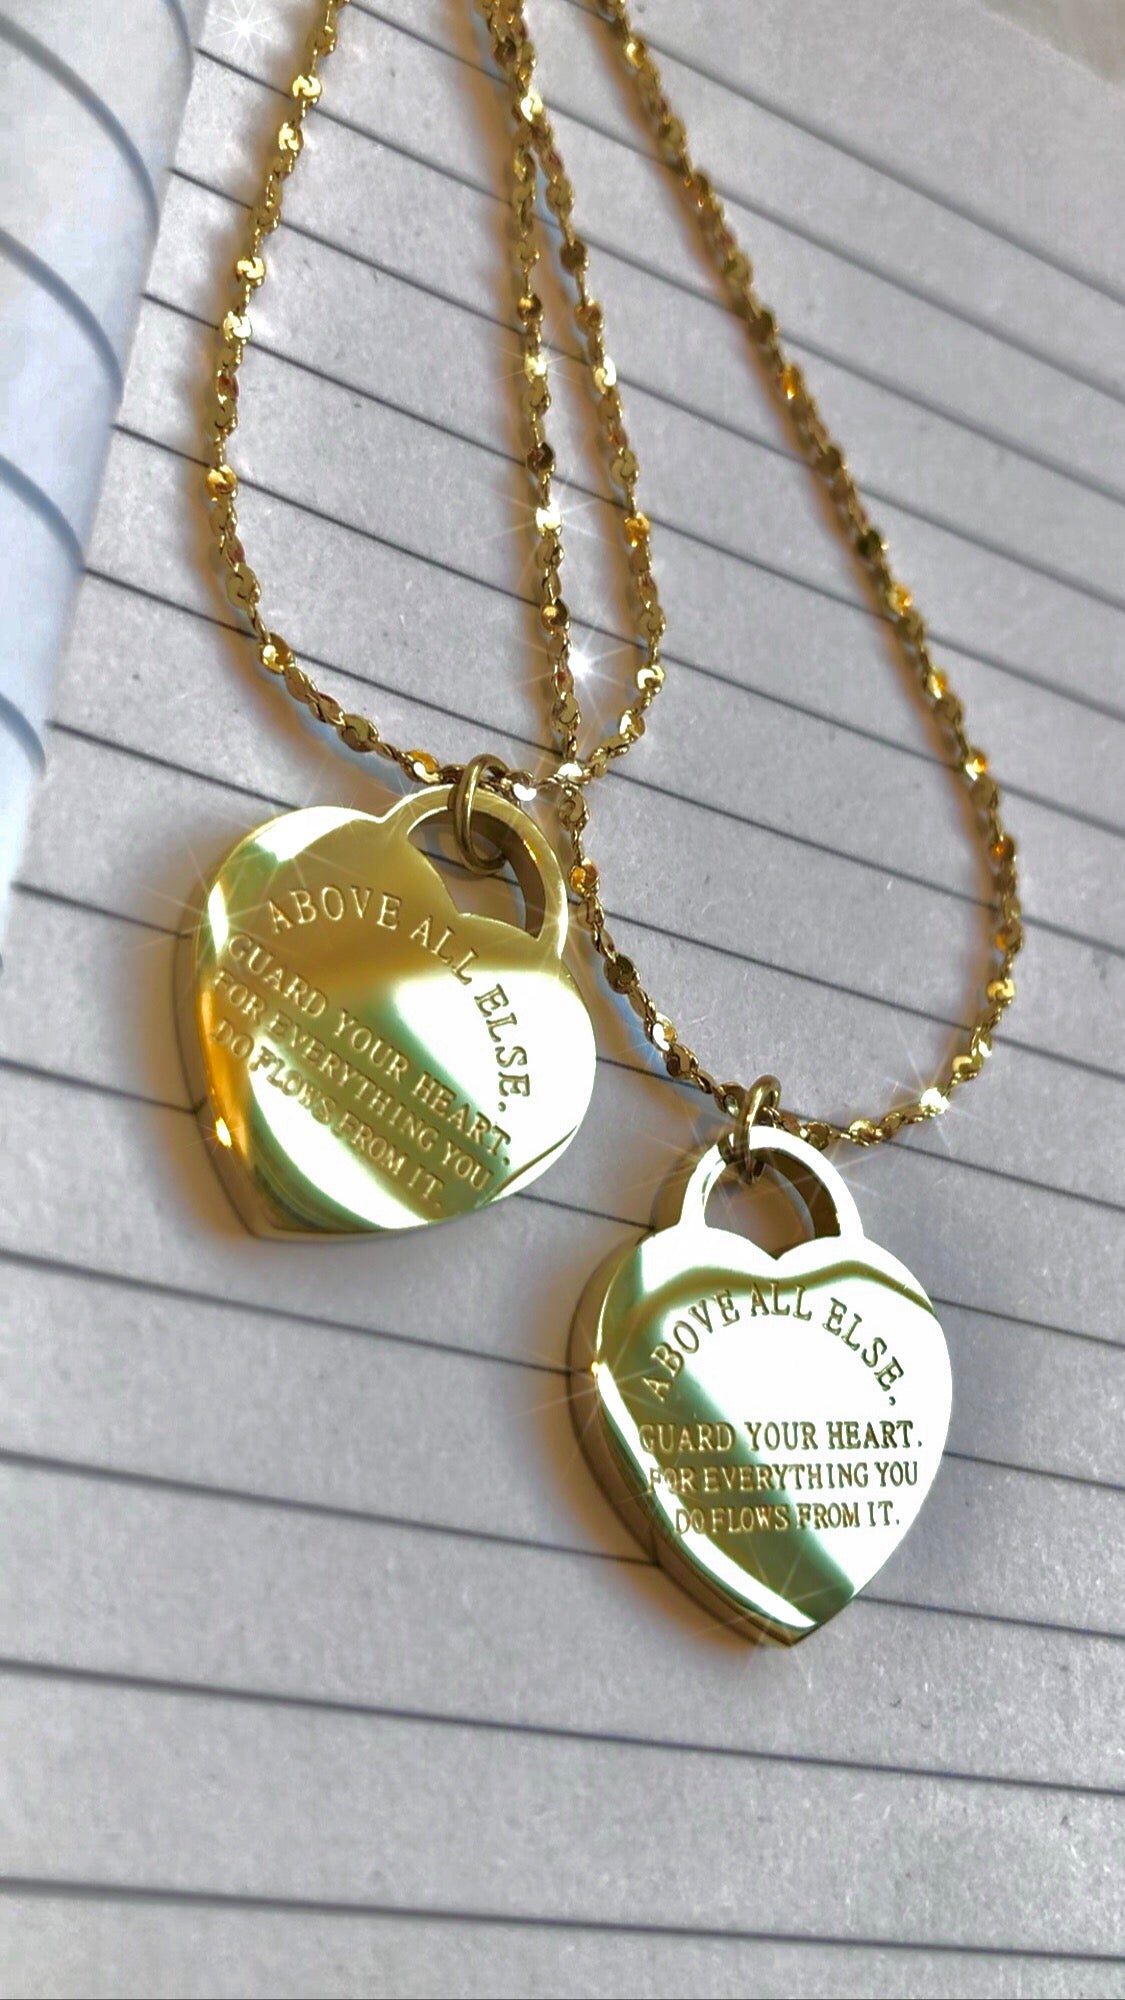 Proverbs 4:23 Heart Necklace